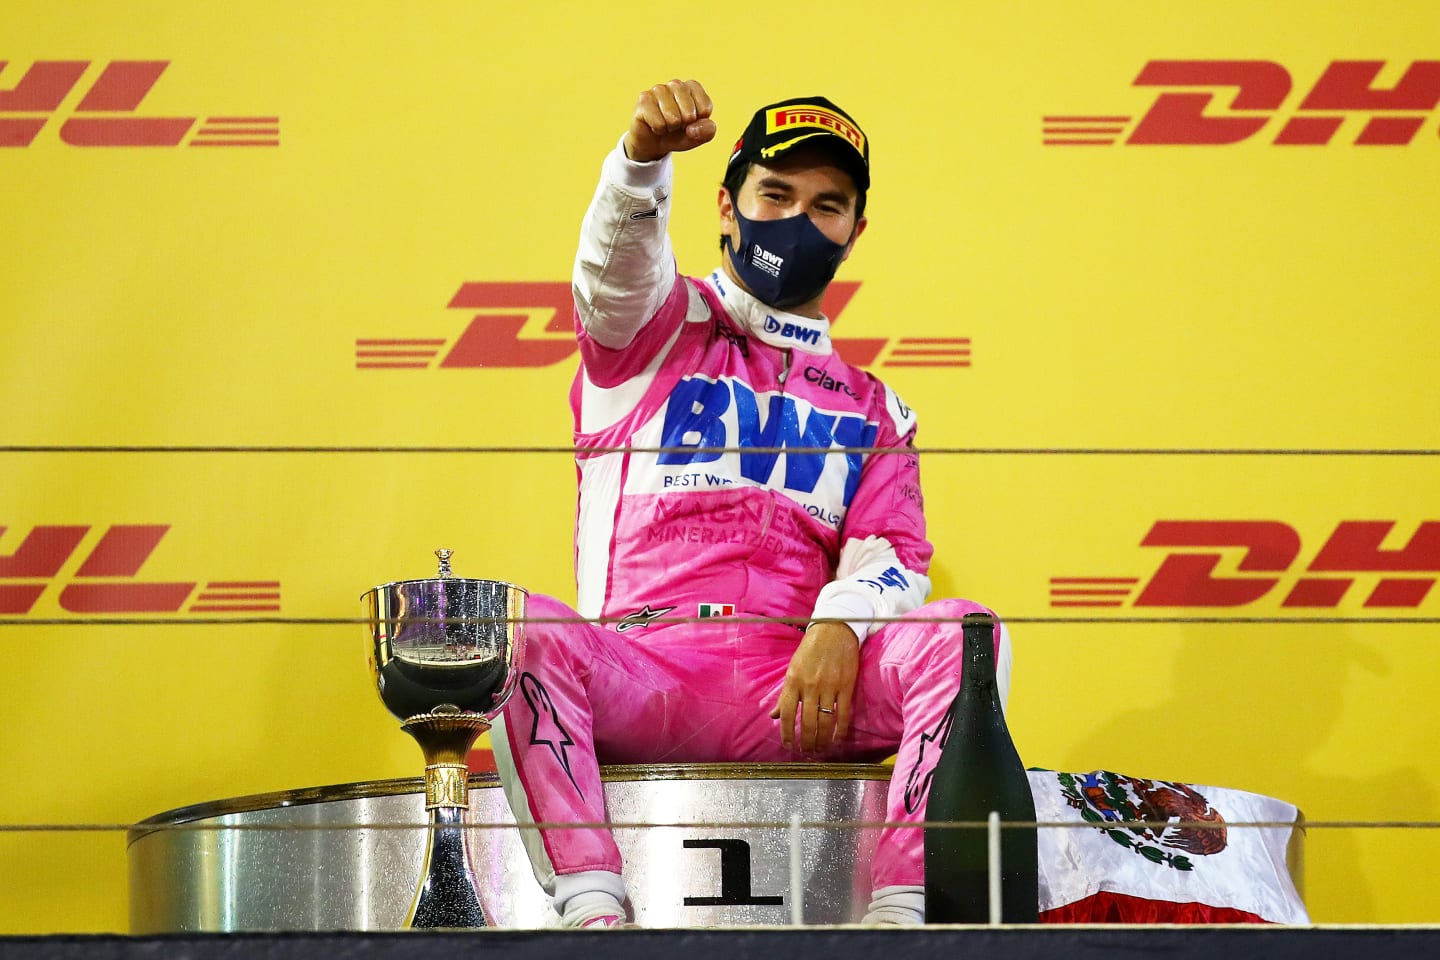 BAHRAIN, BAHRAIN - DECEMBER 06: Race winner Sergio Perez of Mexico and Racing Point celebrates his maiden F1 victory on the podium during the F1 Grand Prix of Sakhir at Bahrain International Circuit on December 06, 2020 in Bahrain, Bahrain. (Photo by Bryn Lennon/Getty Images)